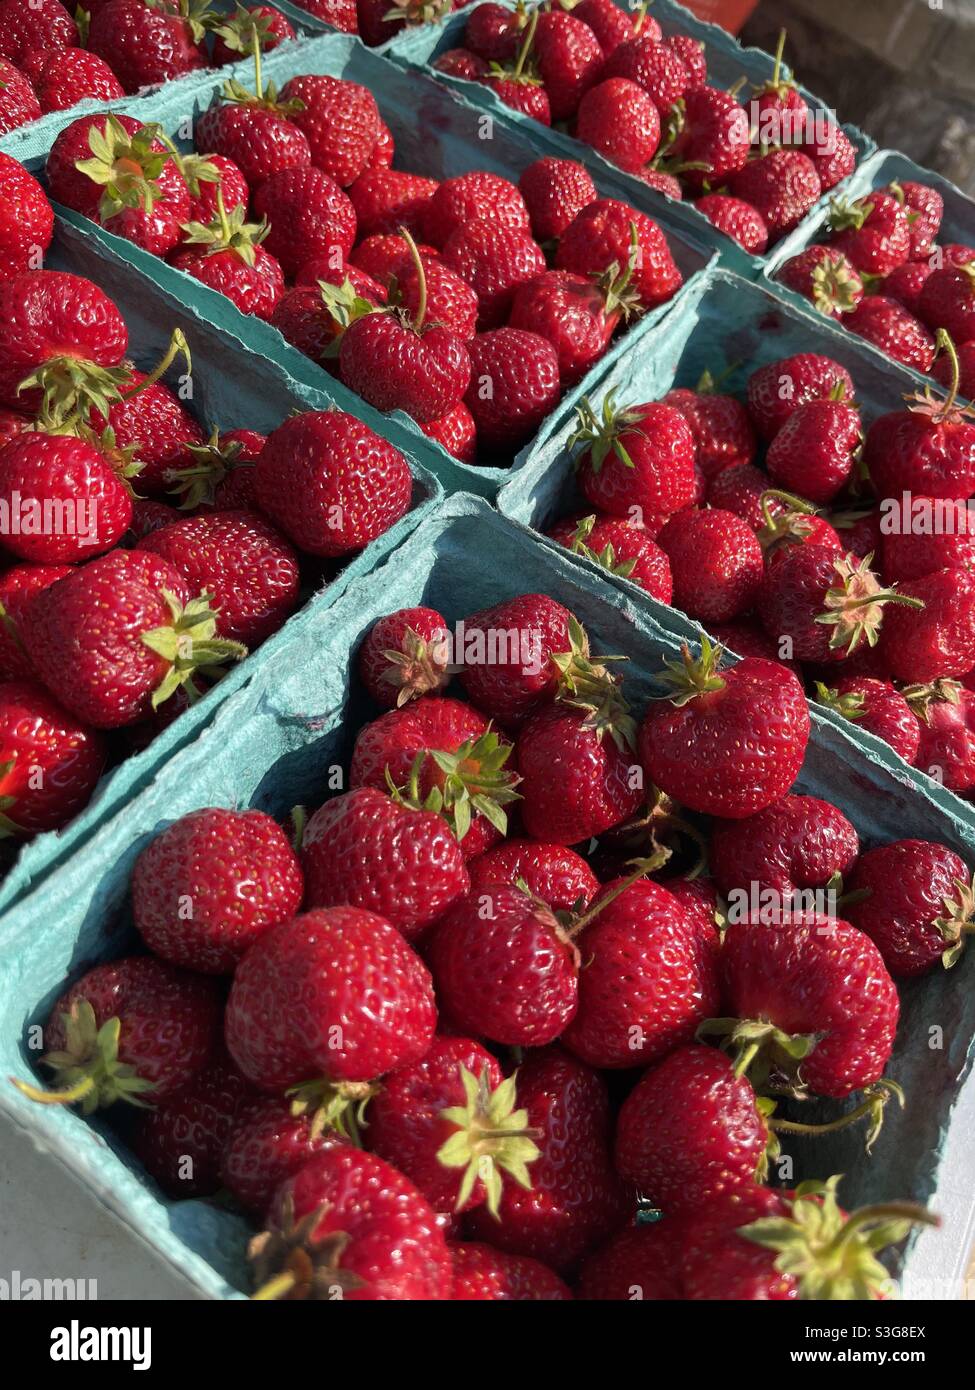 Freshly picked strawberries at a farmer’s market Stock Photo